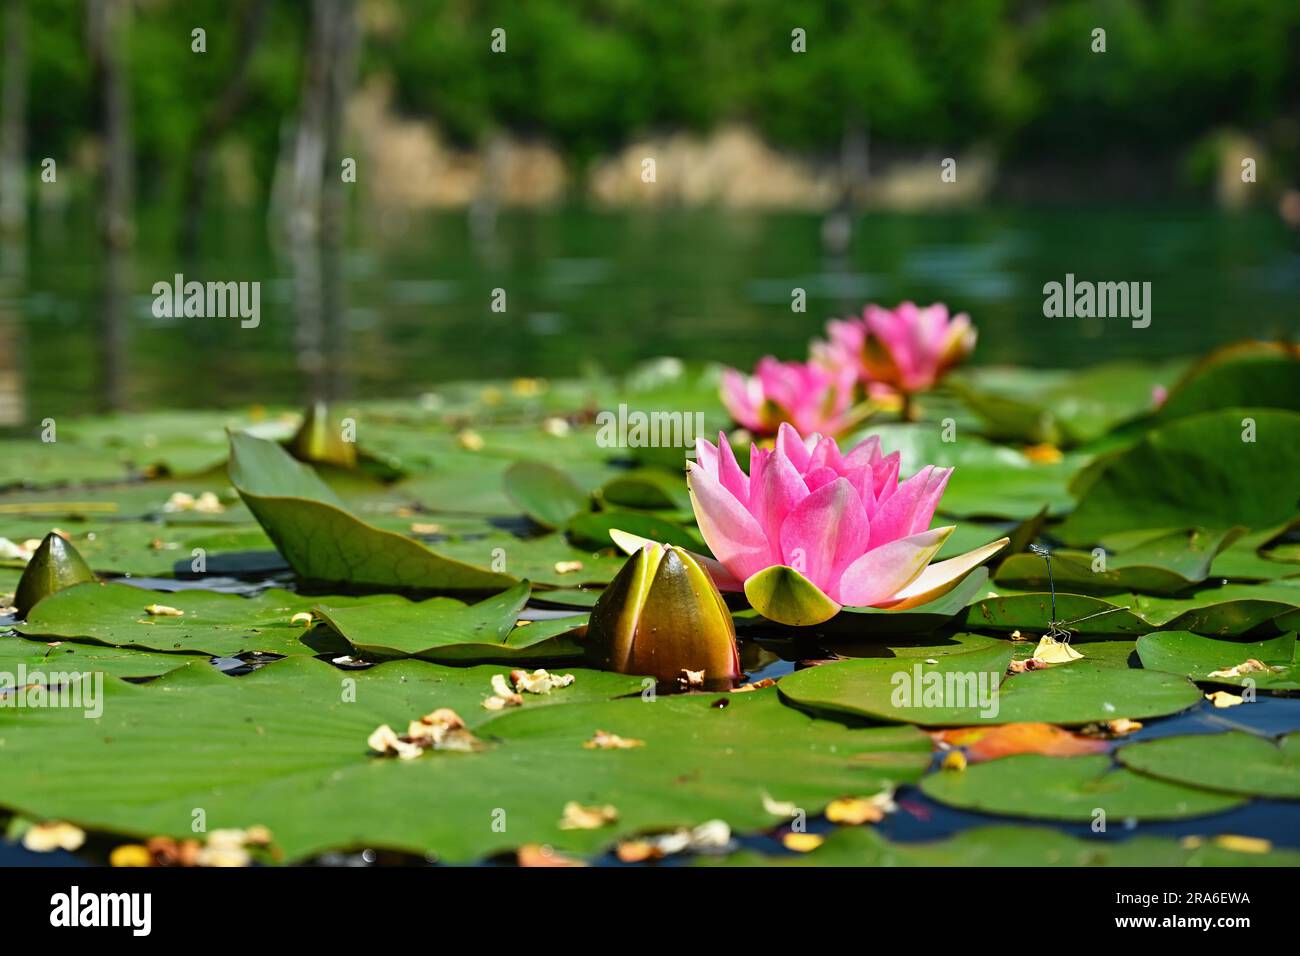 Beautiful blooming water lily plant. Colorful nature background for massage, spa and relaxation. Stock Photo